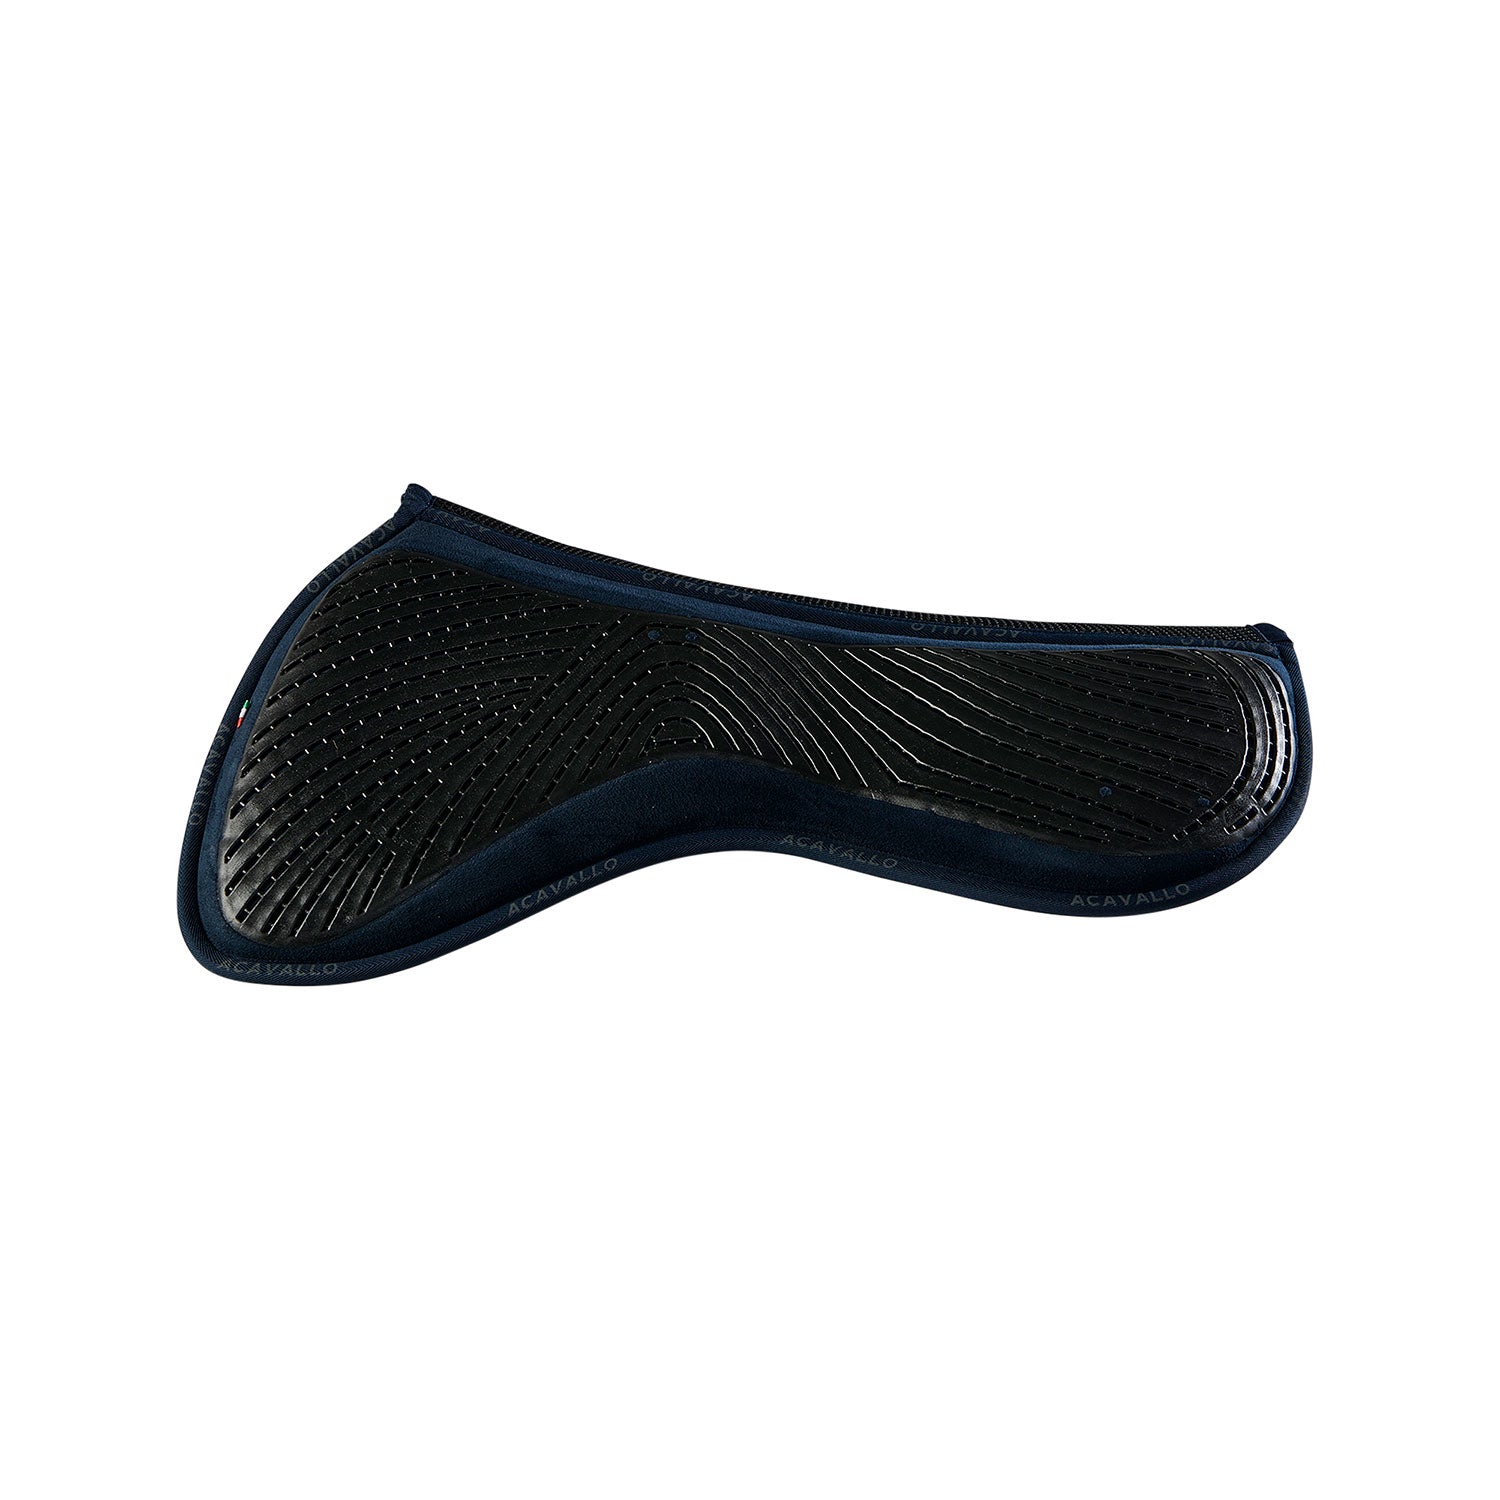 Pad Close contact double sided jumping gel pad memory foam - Reitstiefel Kandel - Dein Reitshop